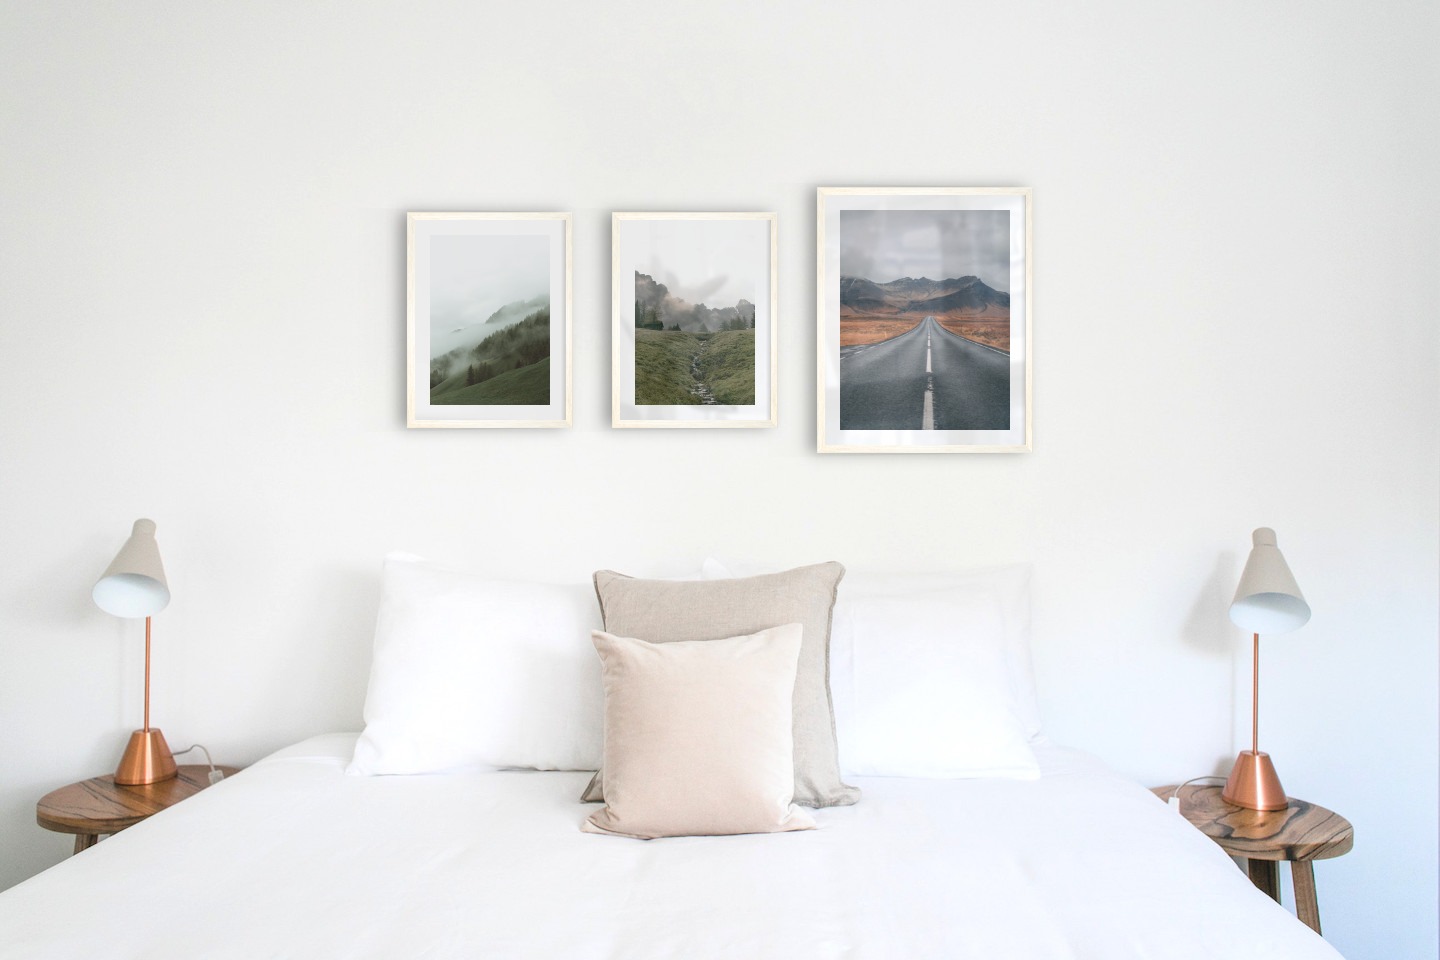 Gallery wall with picture frames in light wood in sizes 30x40 and 40x50 with prints "Foggy slope", "Green valley in front of mountains" and "Road and mountains"